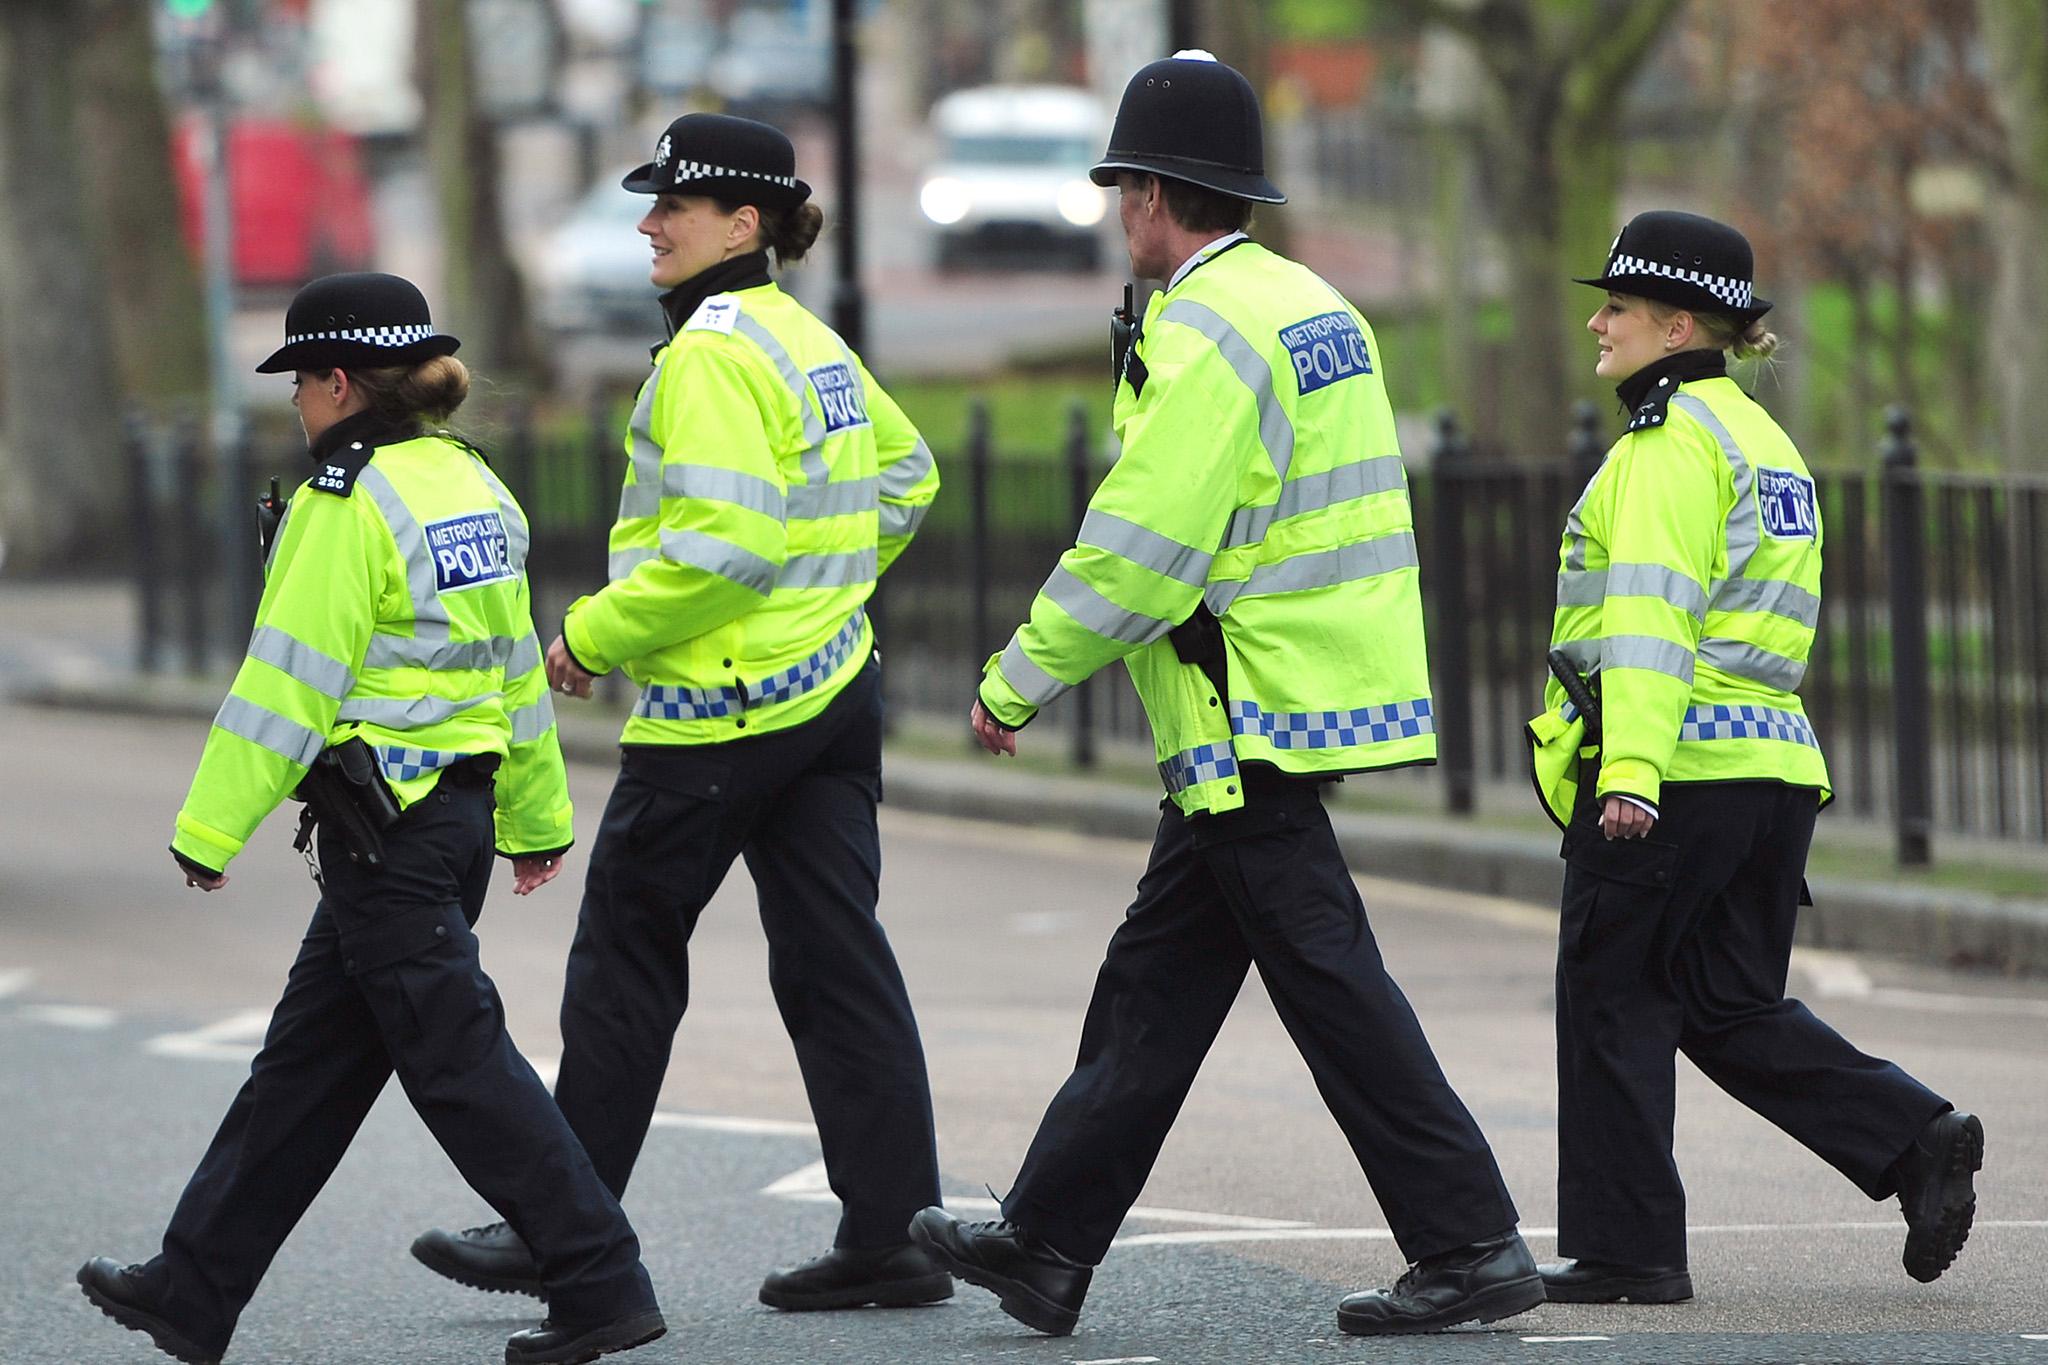 Johnson’s promise to boost police ranks ‘not the answer’, says Martin Hewitt